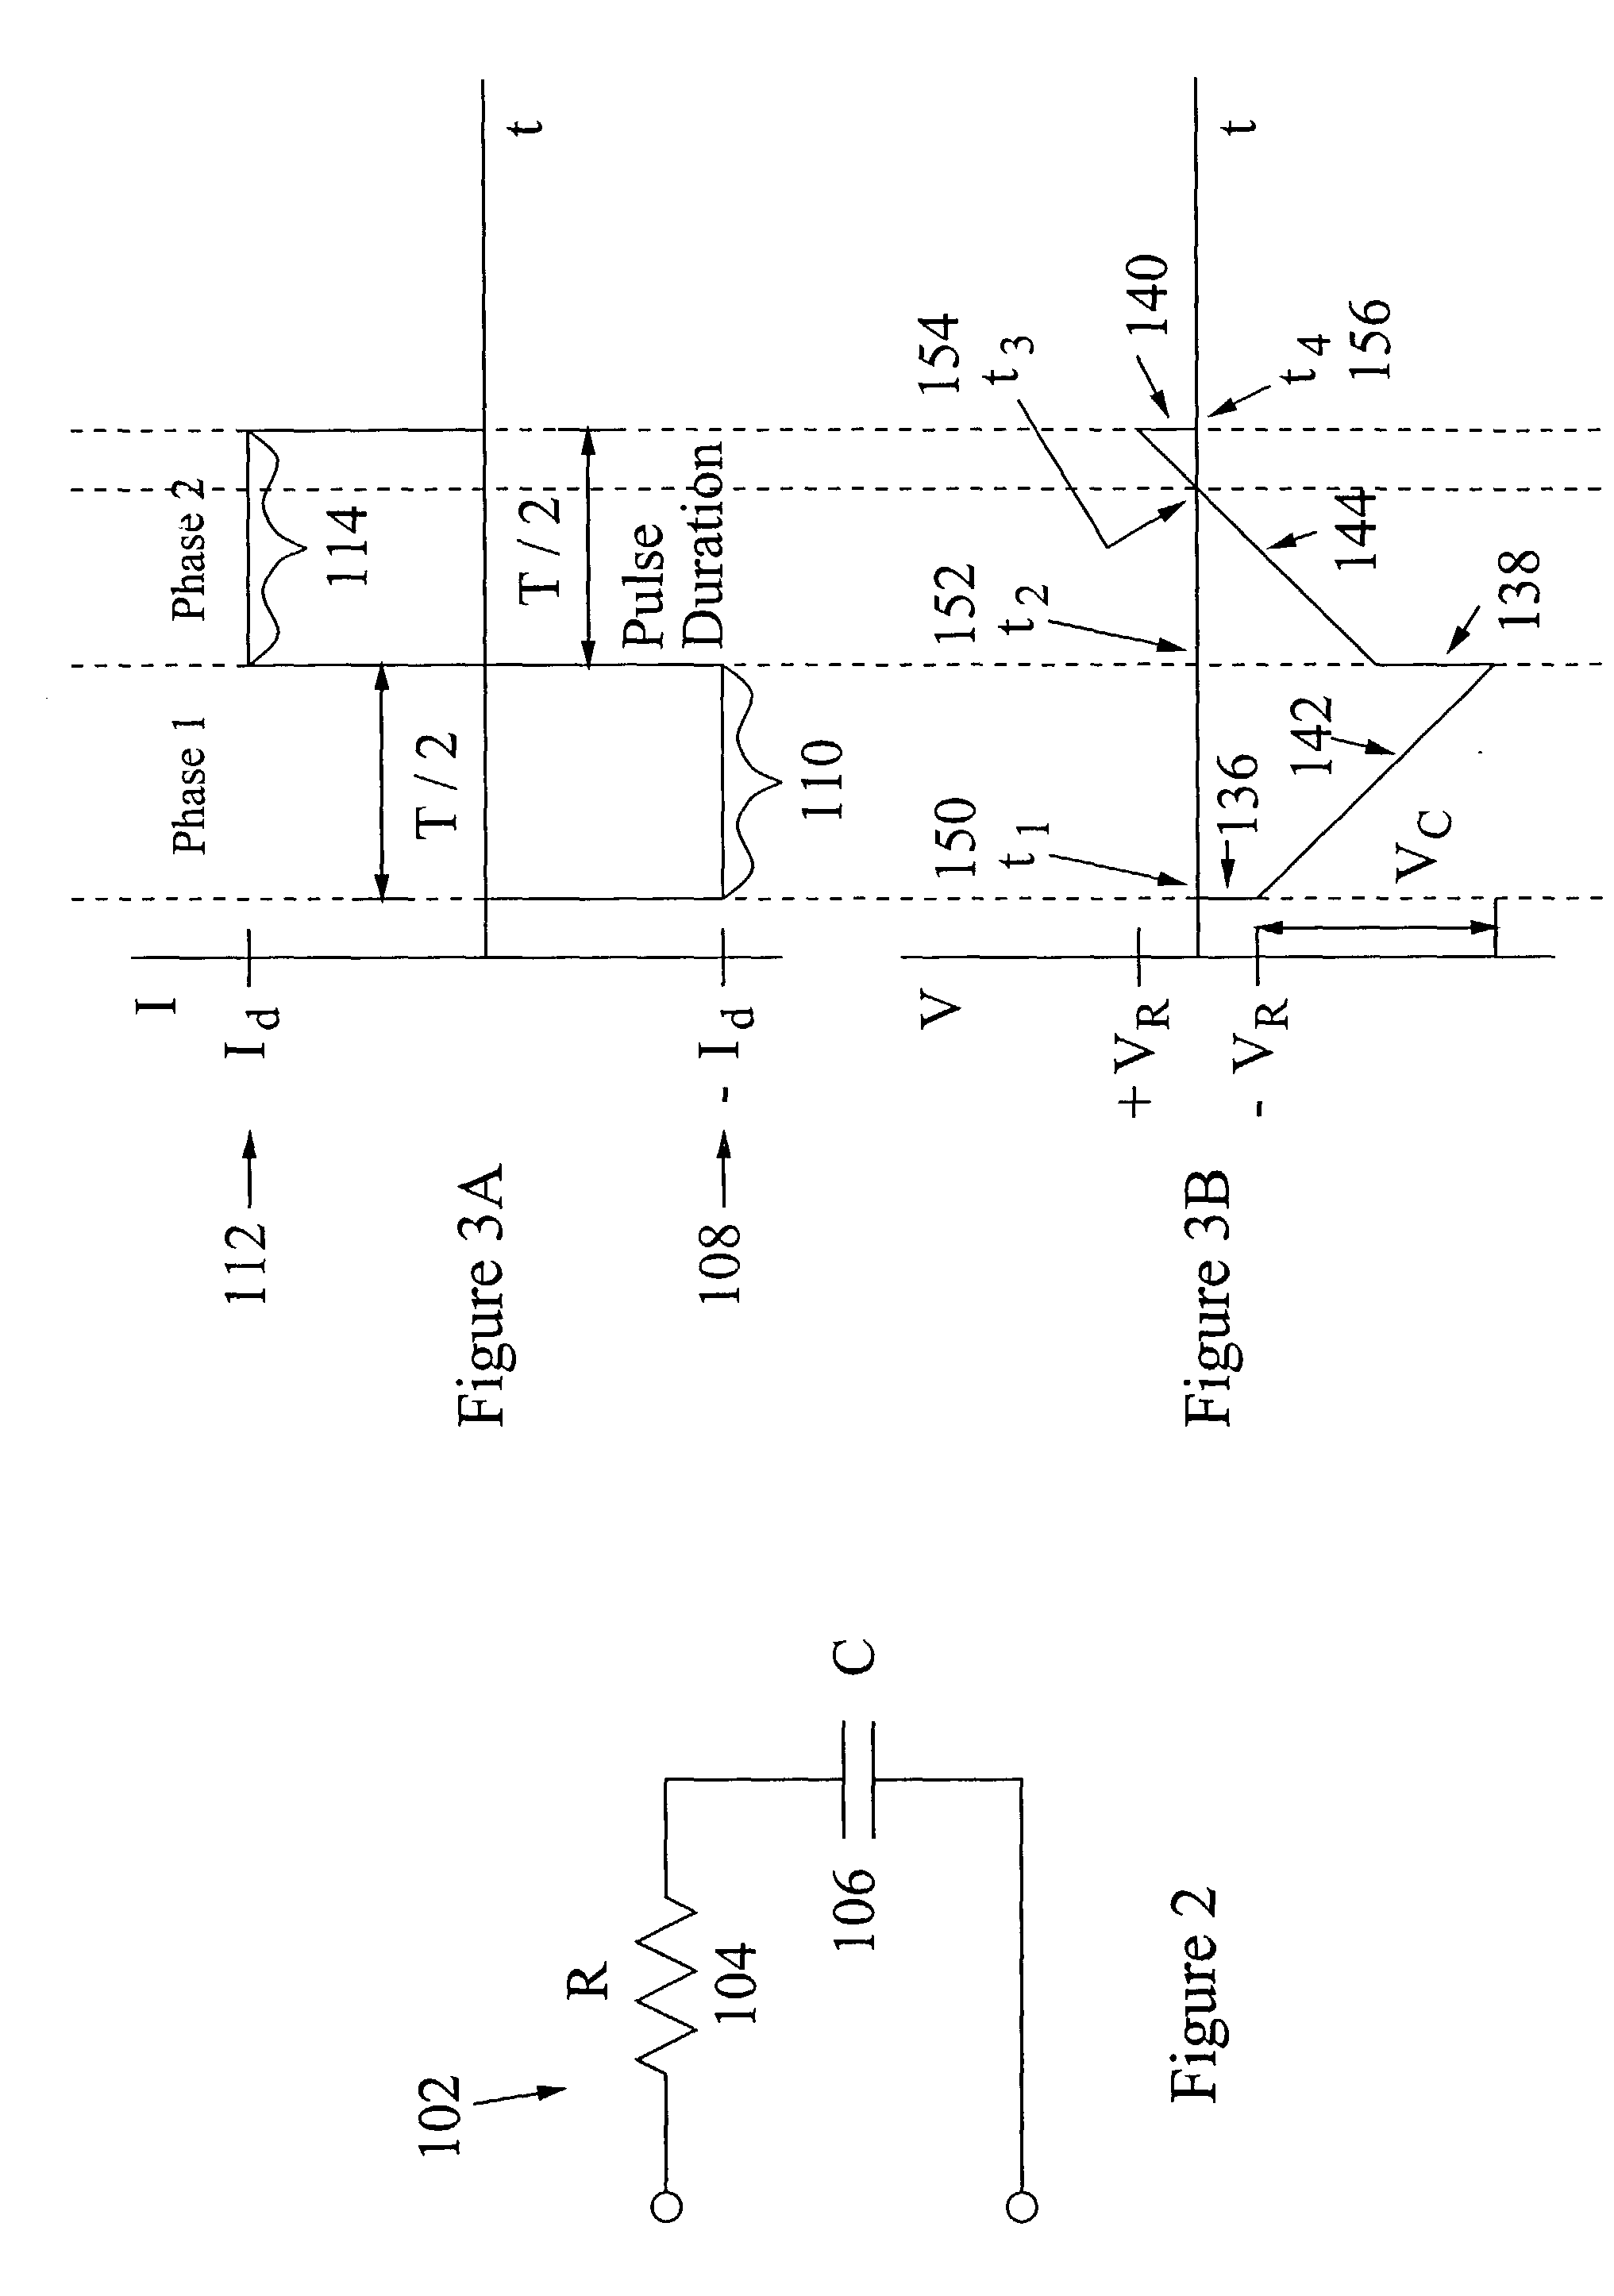 System for and method of power efficient electrical tissue stimulation